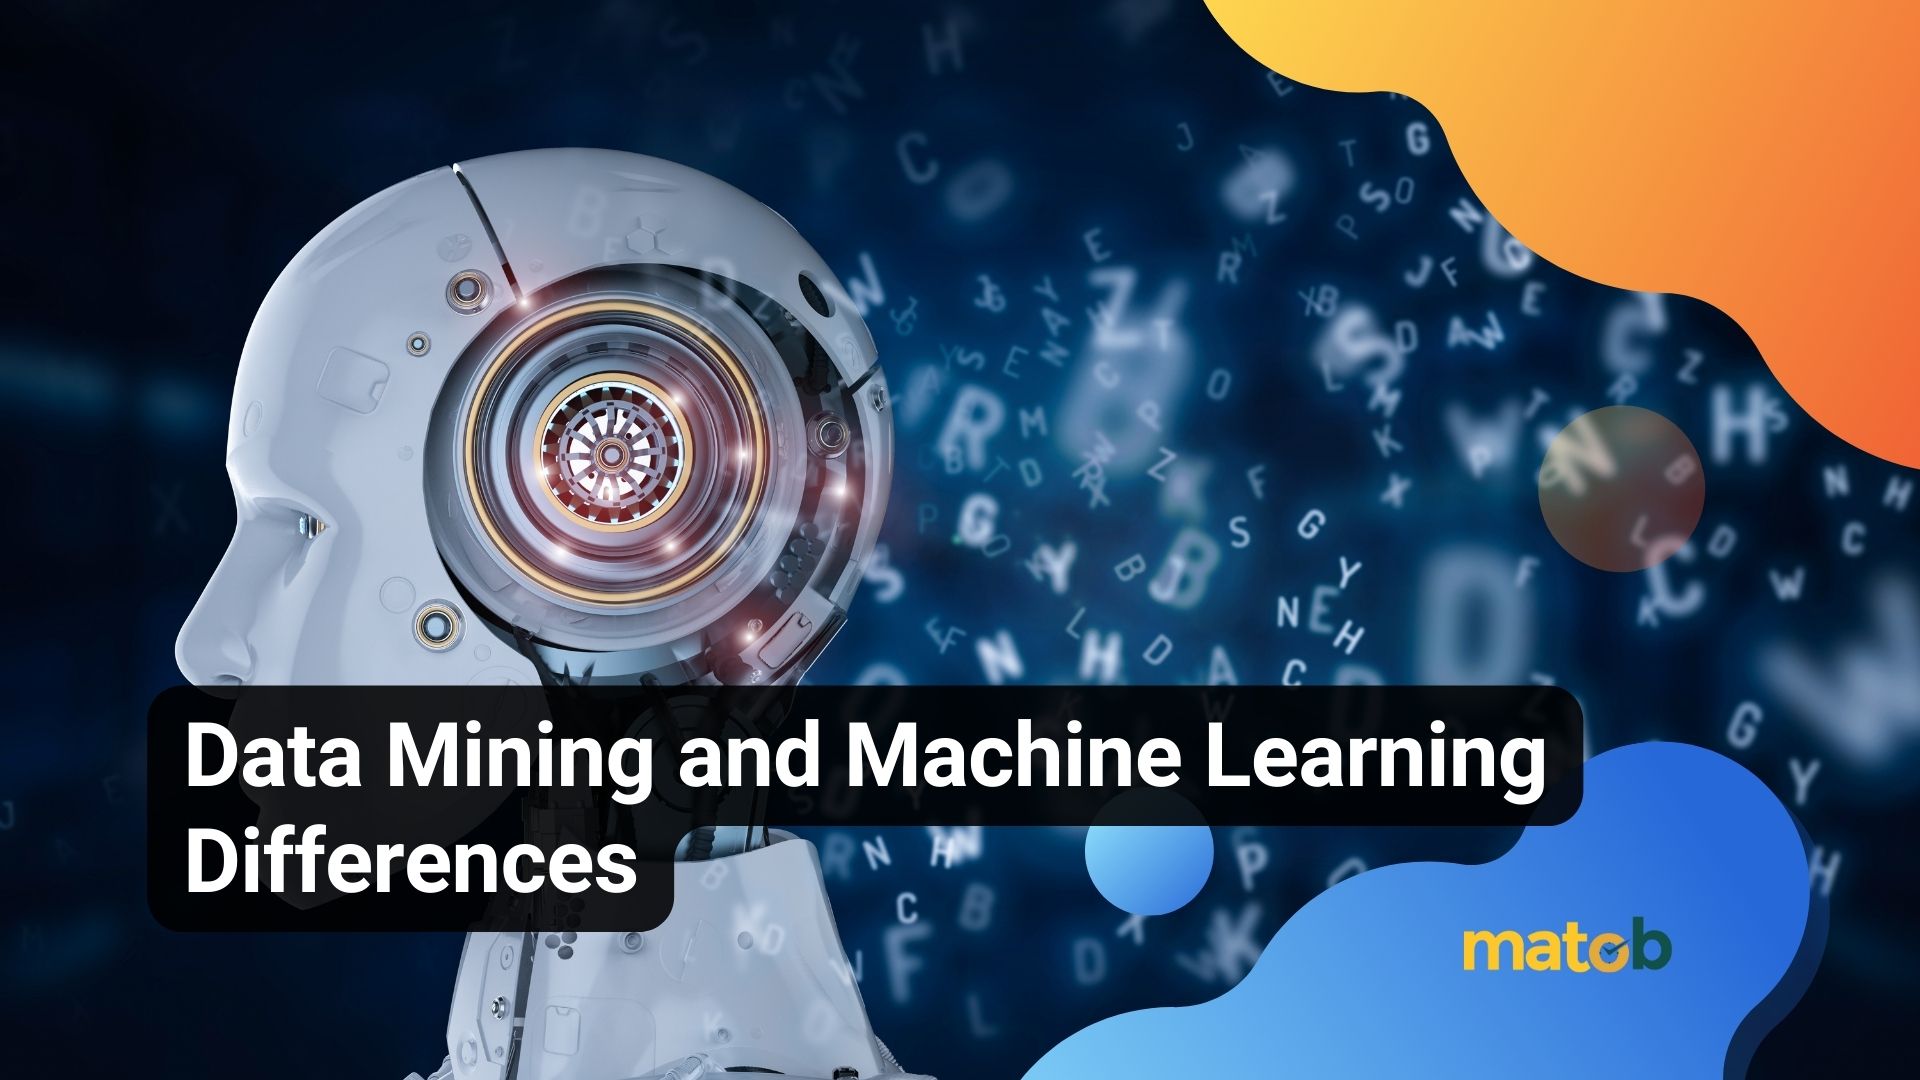 Data Mining and Machine Learning Differences